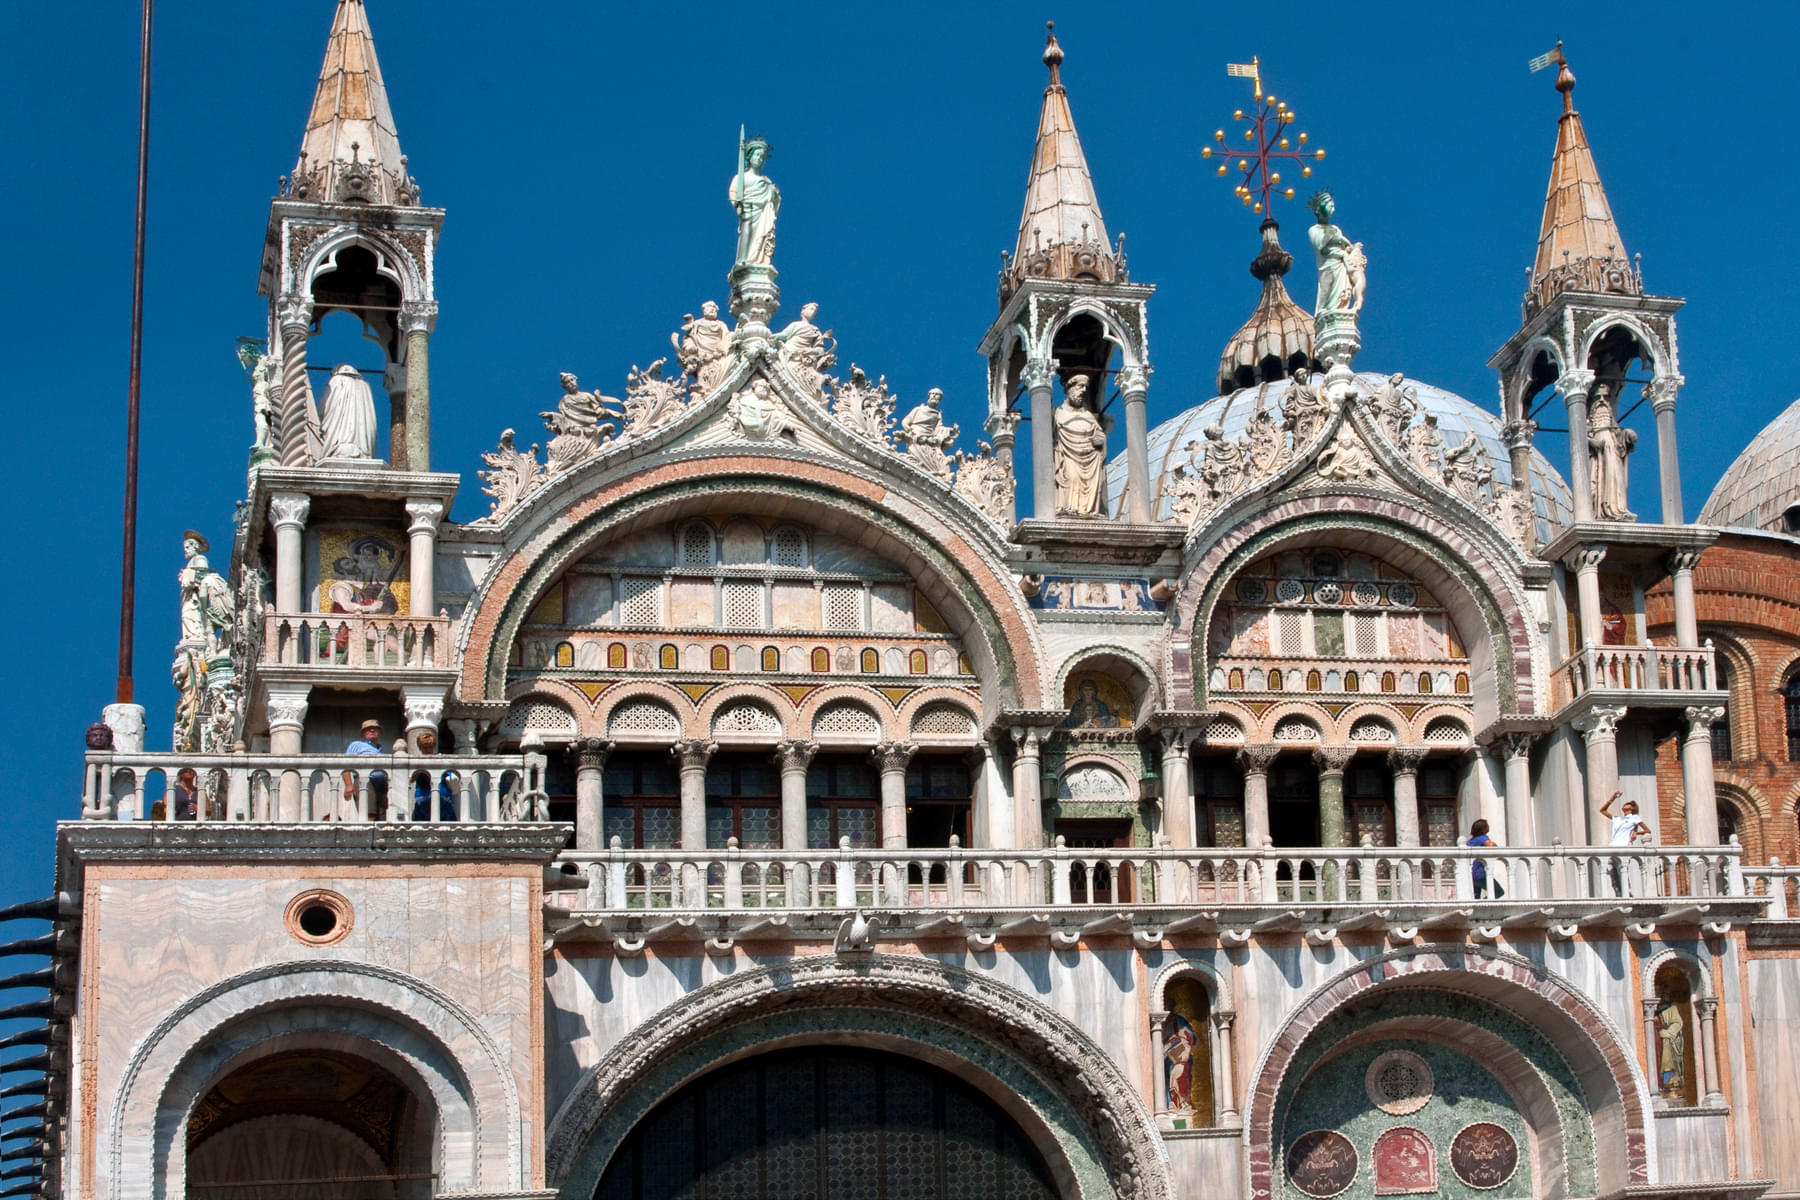 Tips to Visit St. Mark's Basilica Venice